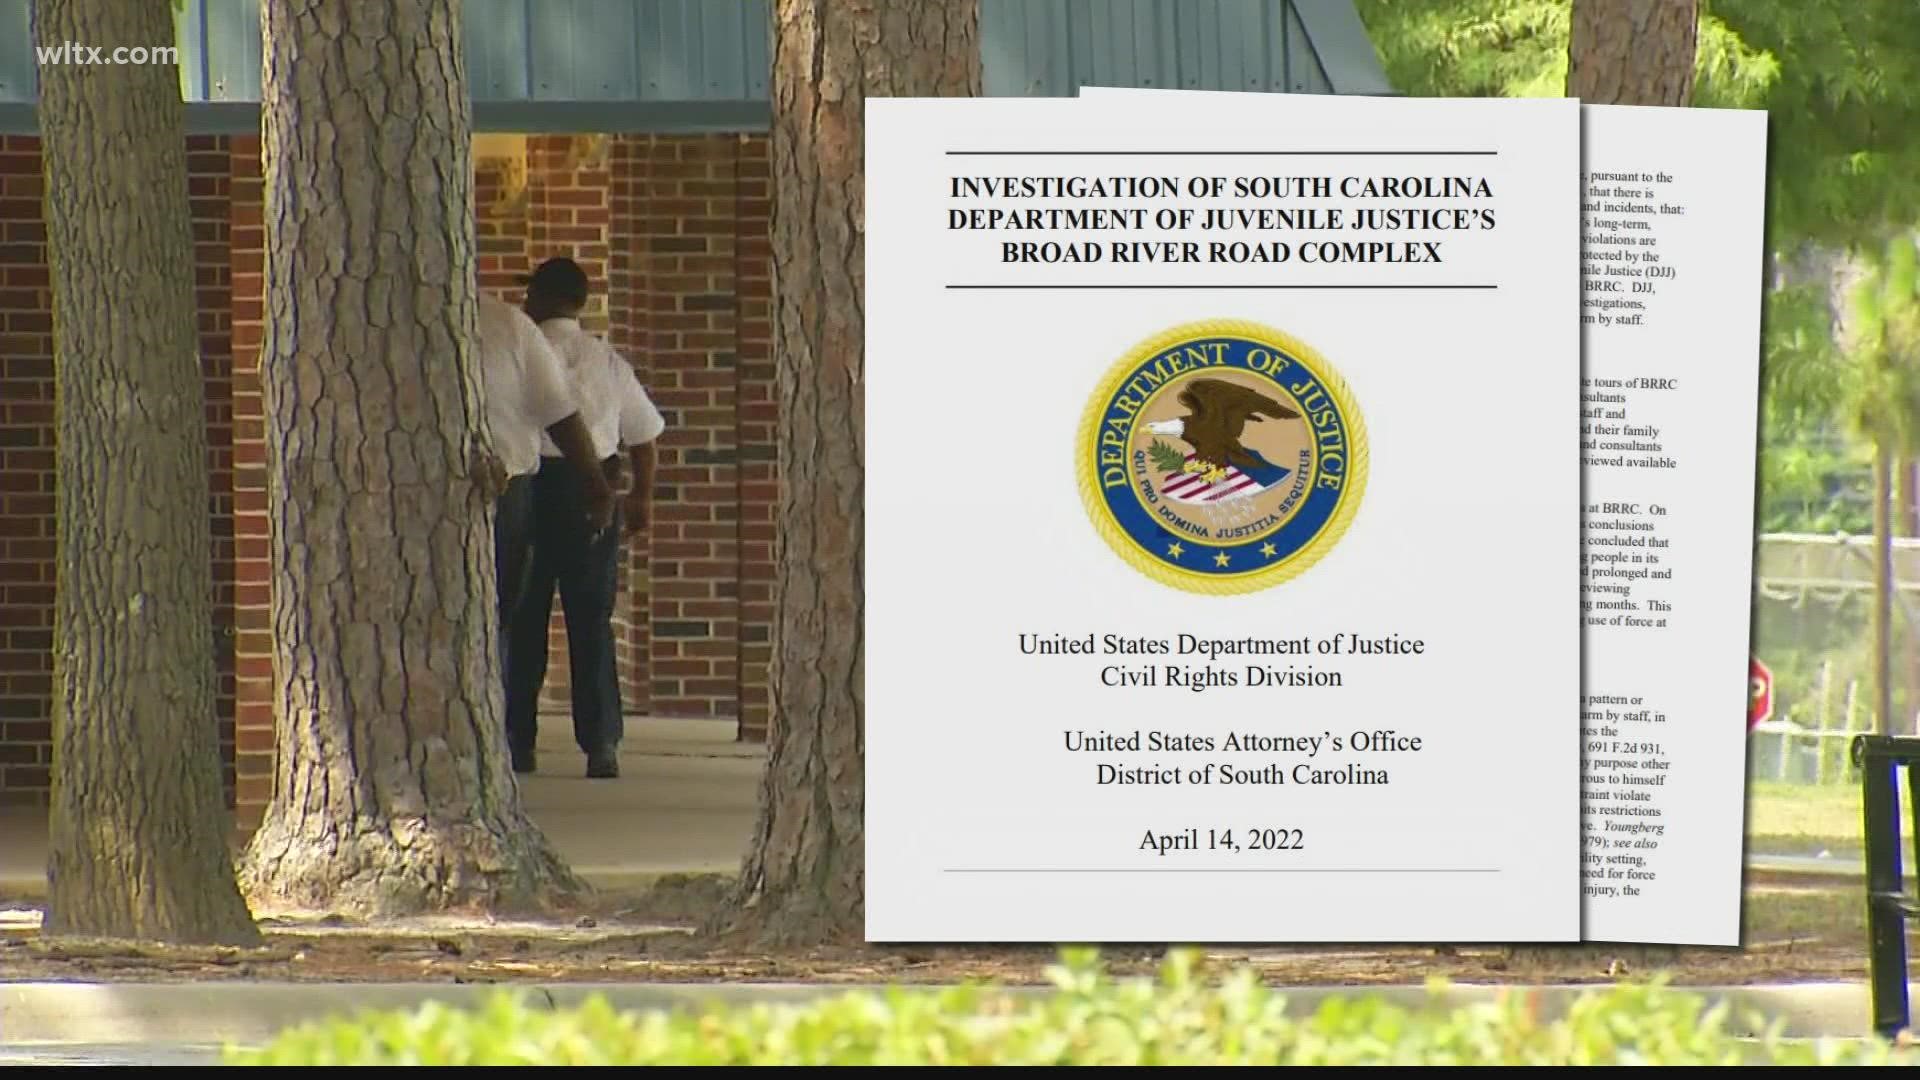 The new report, released by the US Department of Justice after a years-long investigation into SC's Department of Juvenile Justice.